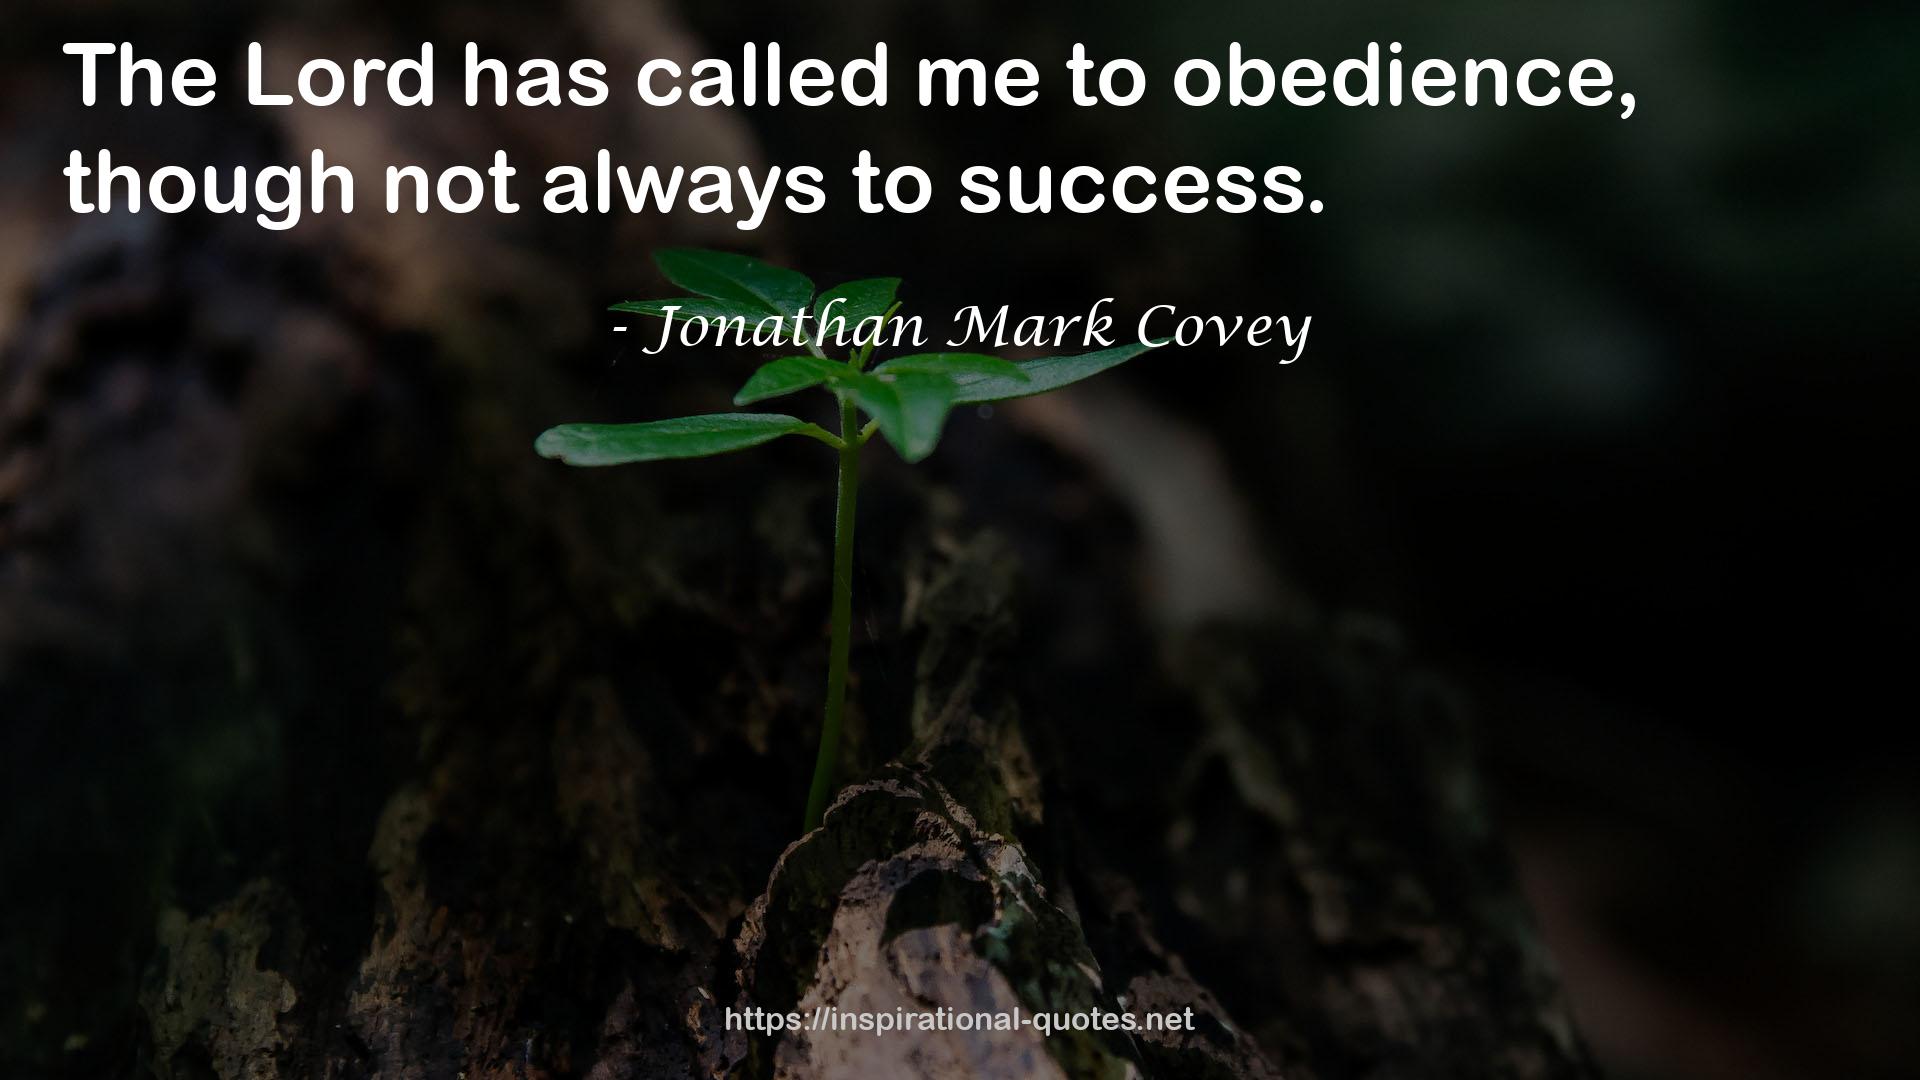 Jonathan Mark Covey QUOTES